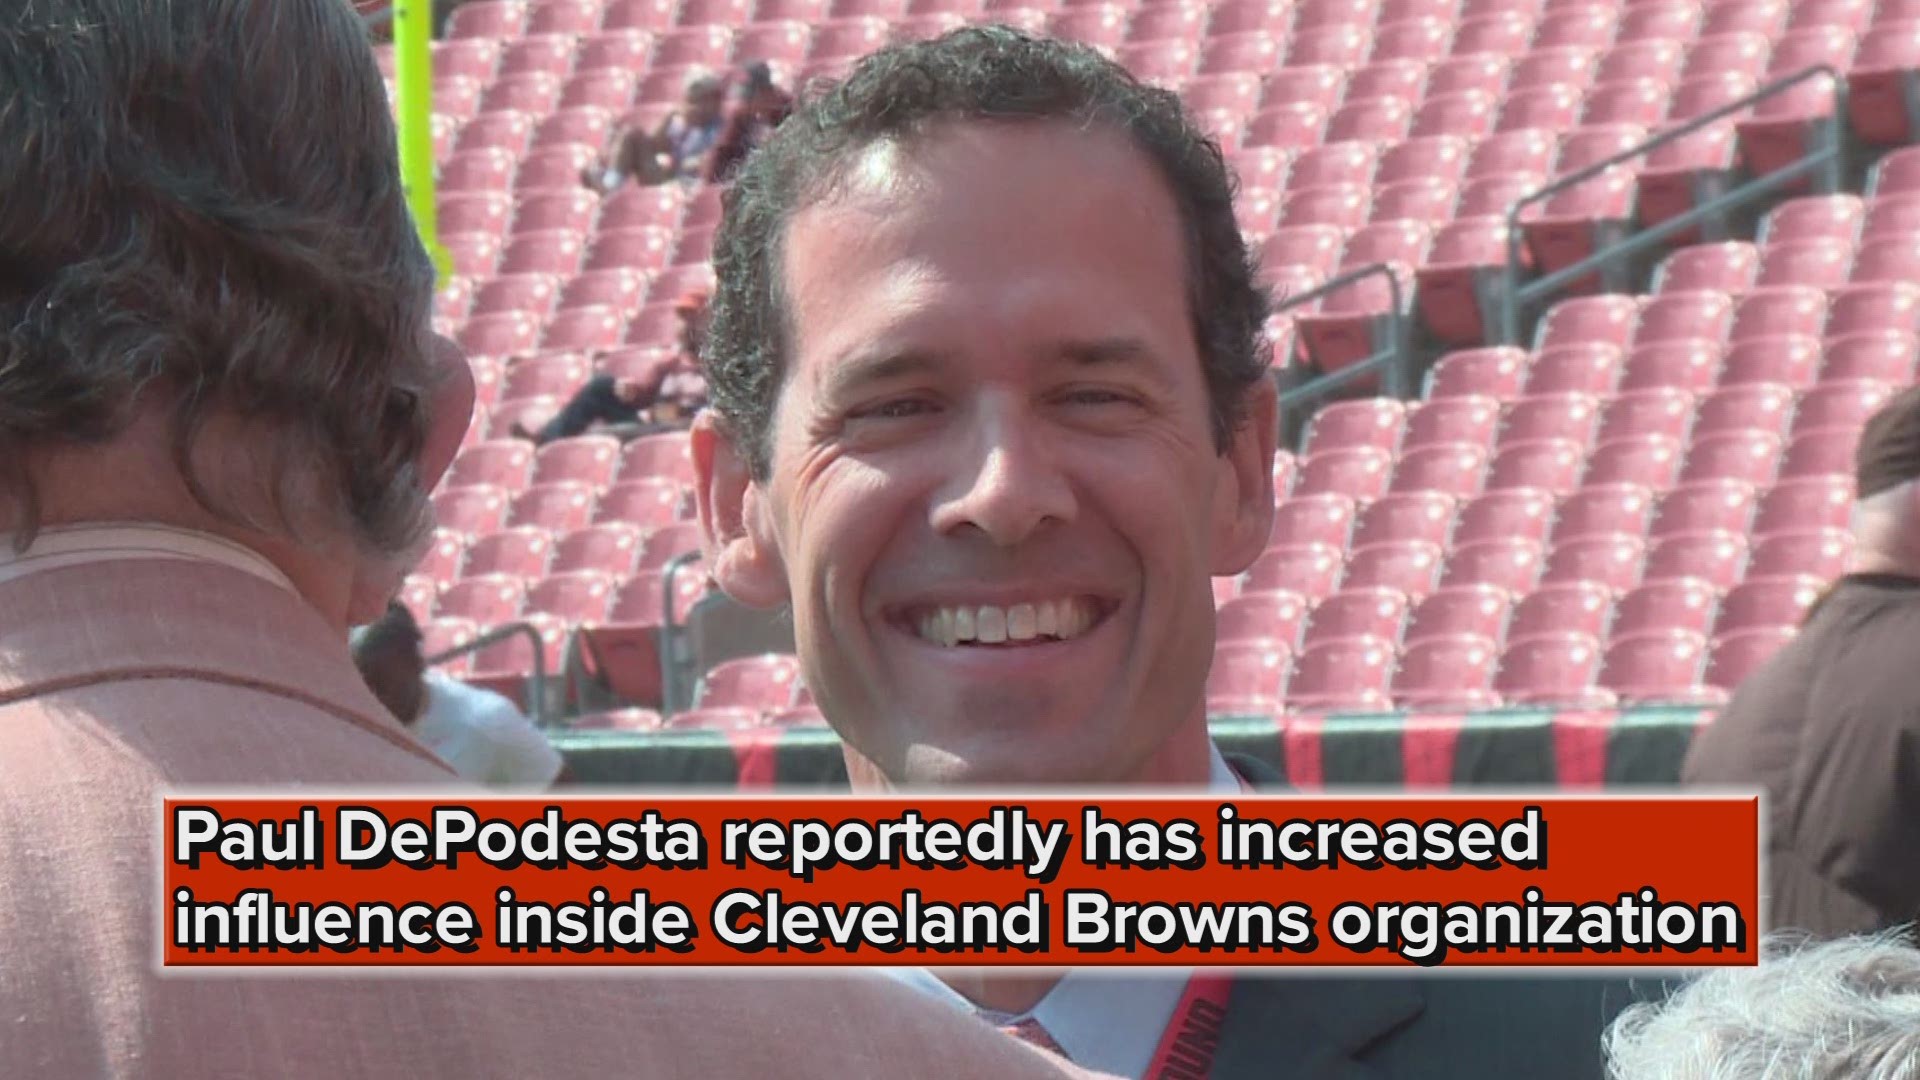 According to Charles Robinson of Yahoo Sports, chief strategy officer Paul DePodesta has had a louder voice inside the Cleveland Browns' organization in recent months.